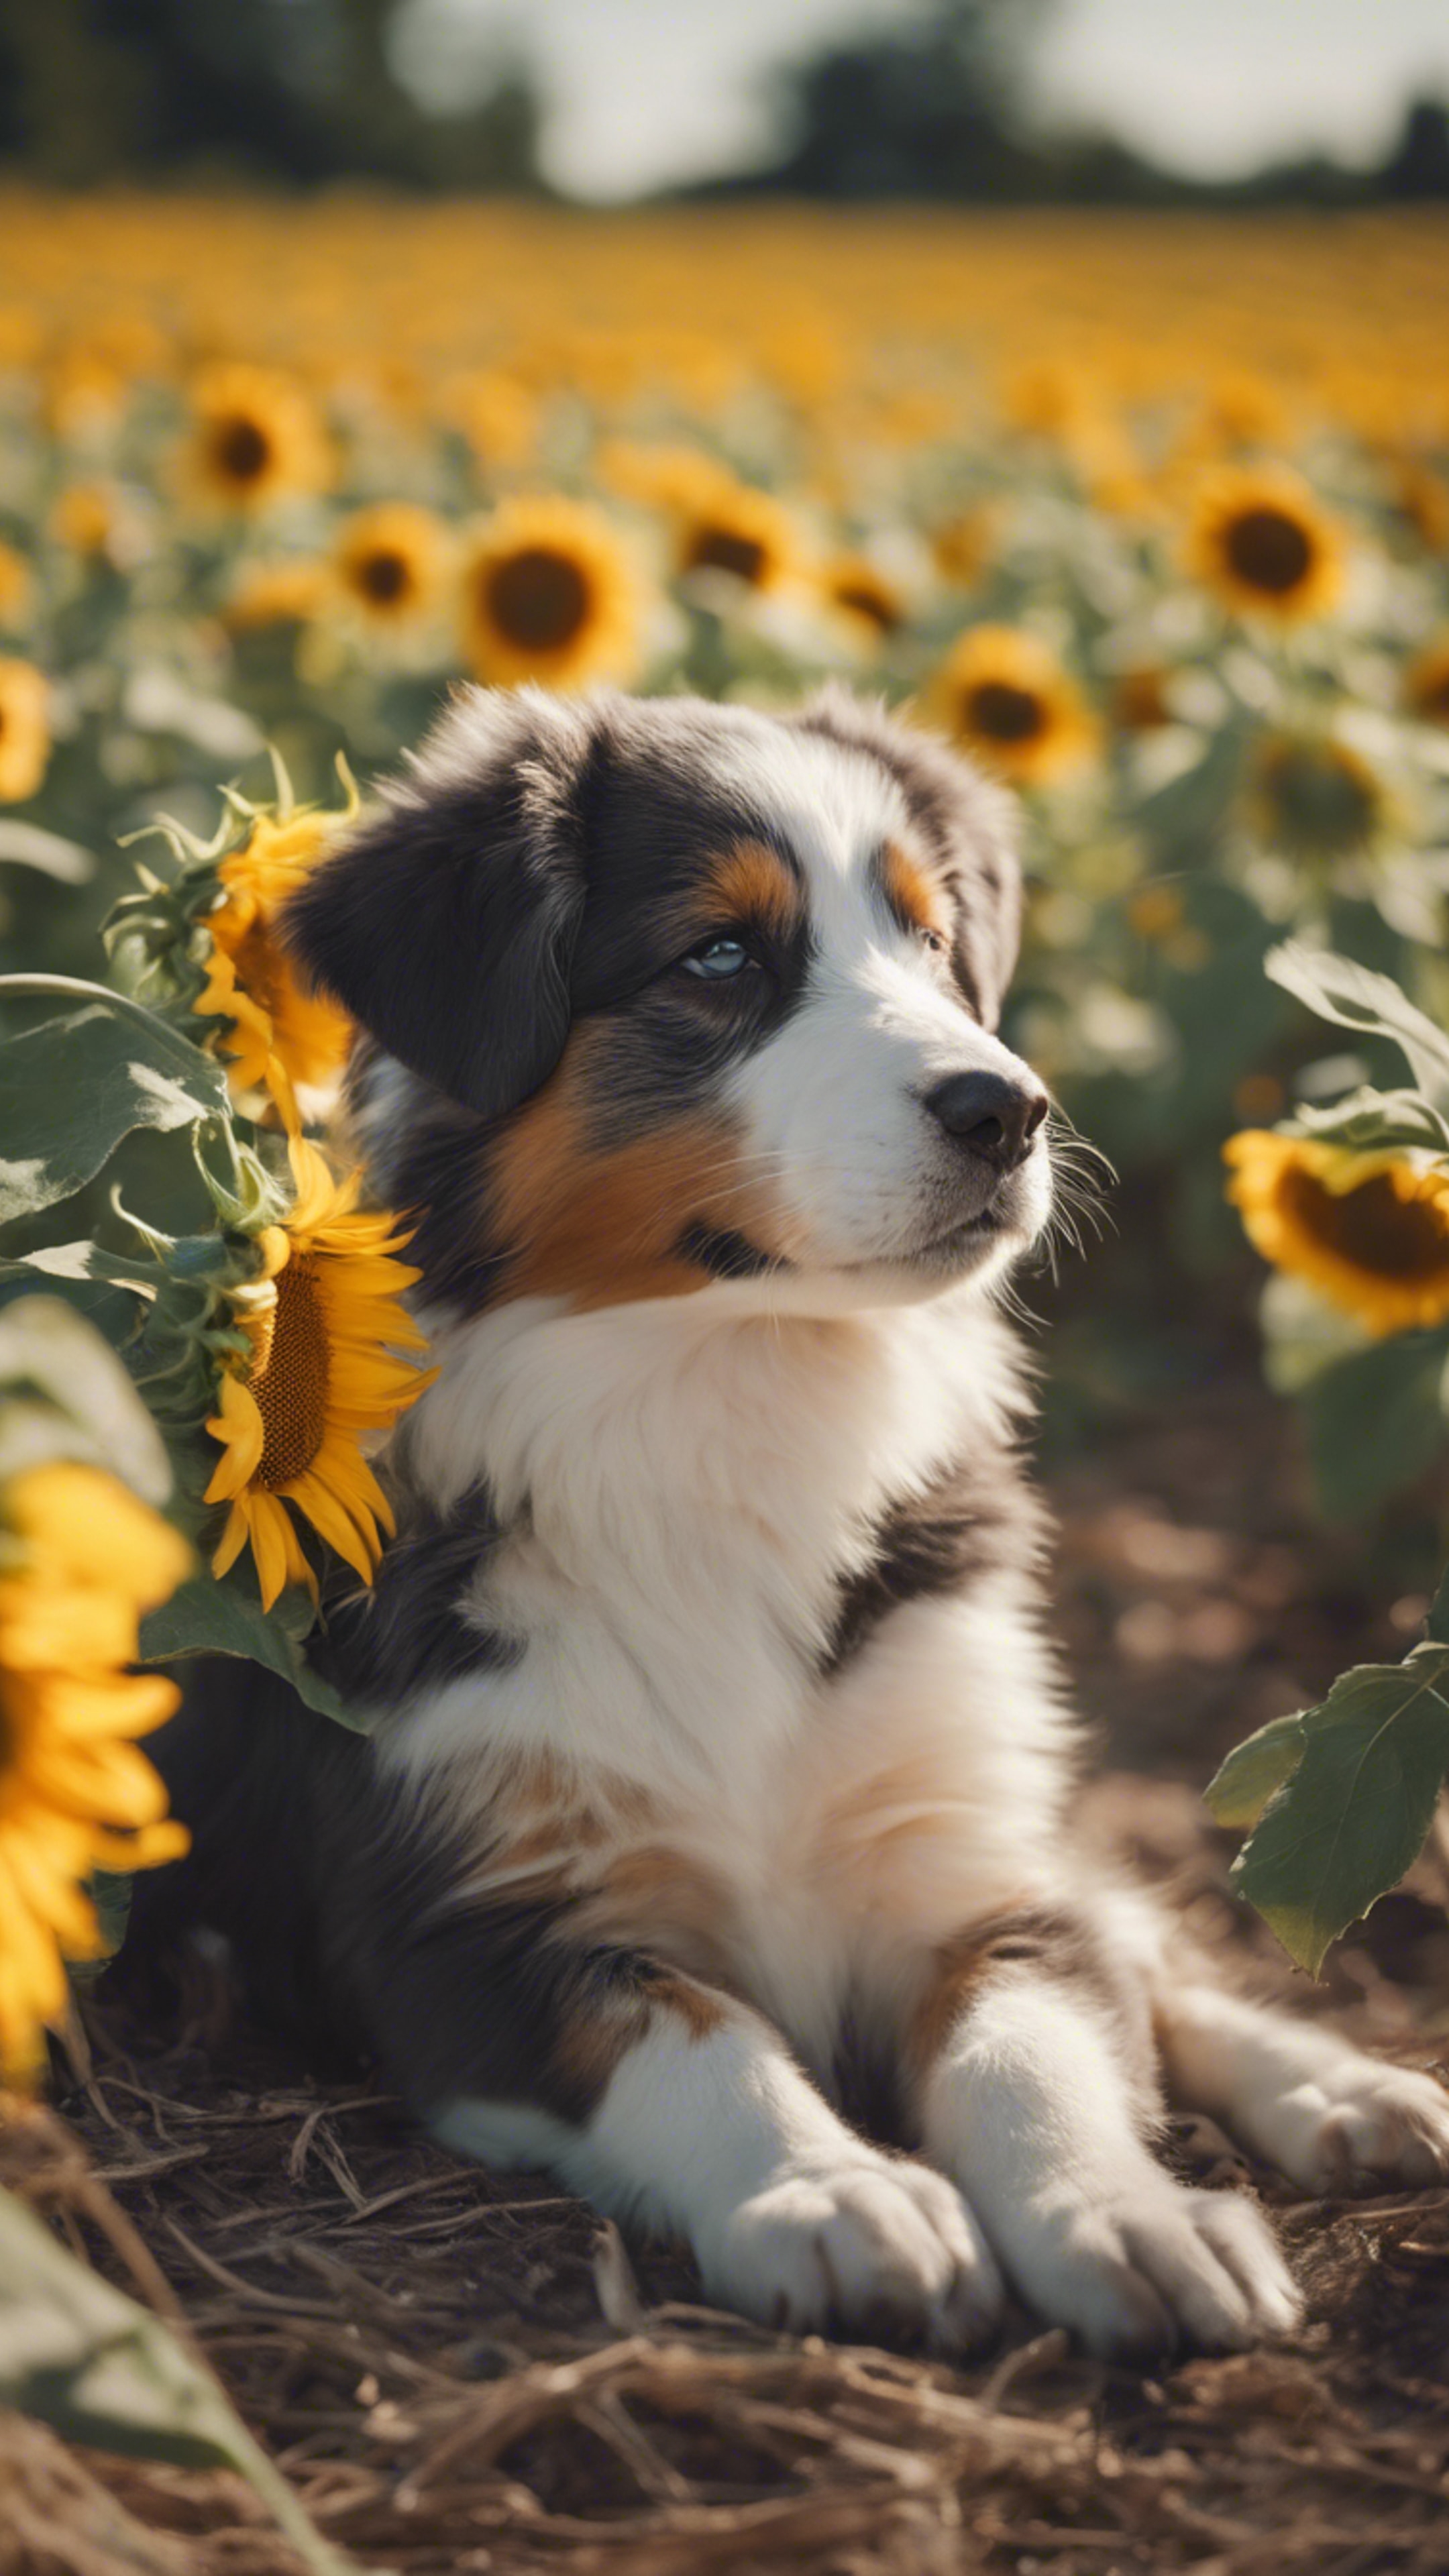 An Australian Shepard puppy dozing off in the field of blooming sunflowers under the summer sun. 벽지[3112e983c8704a9792f4]